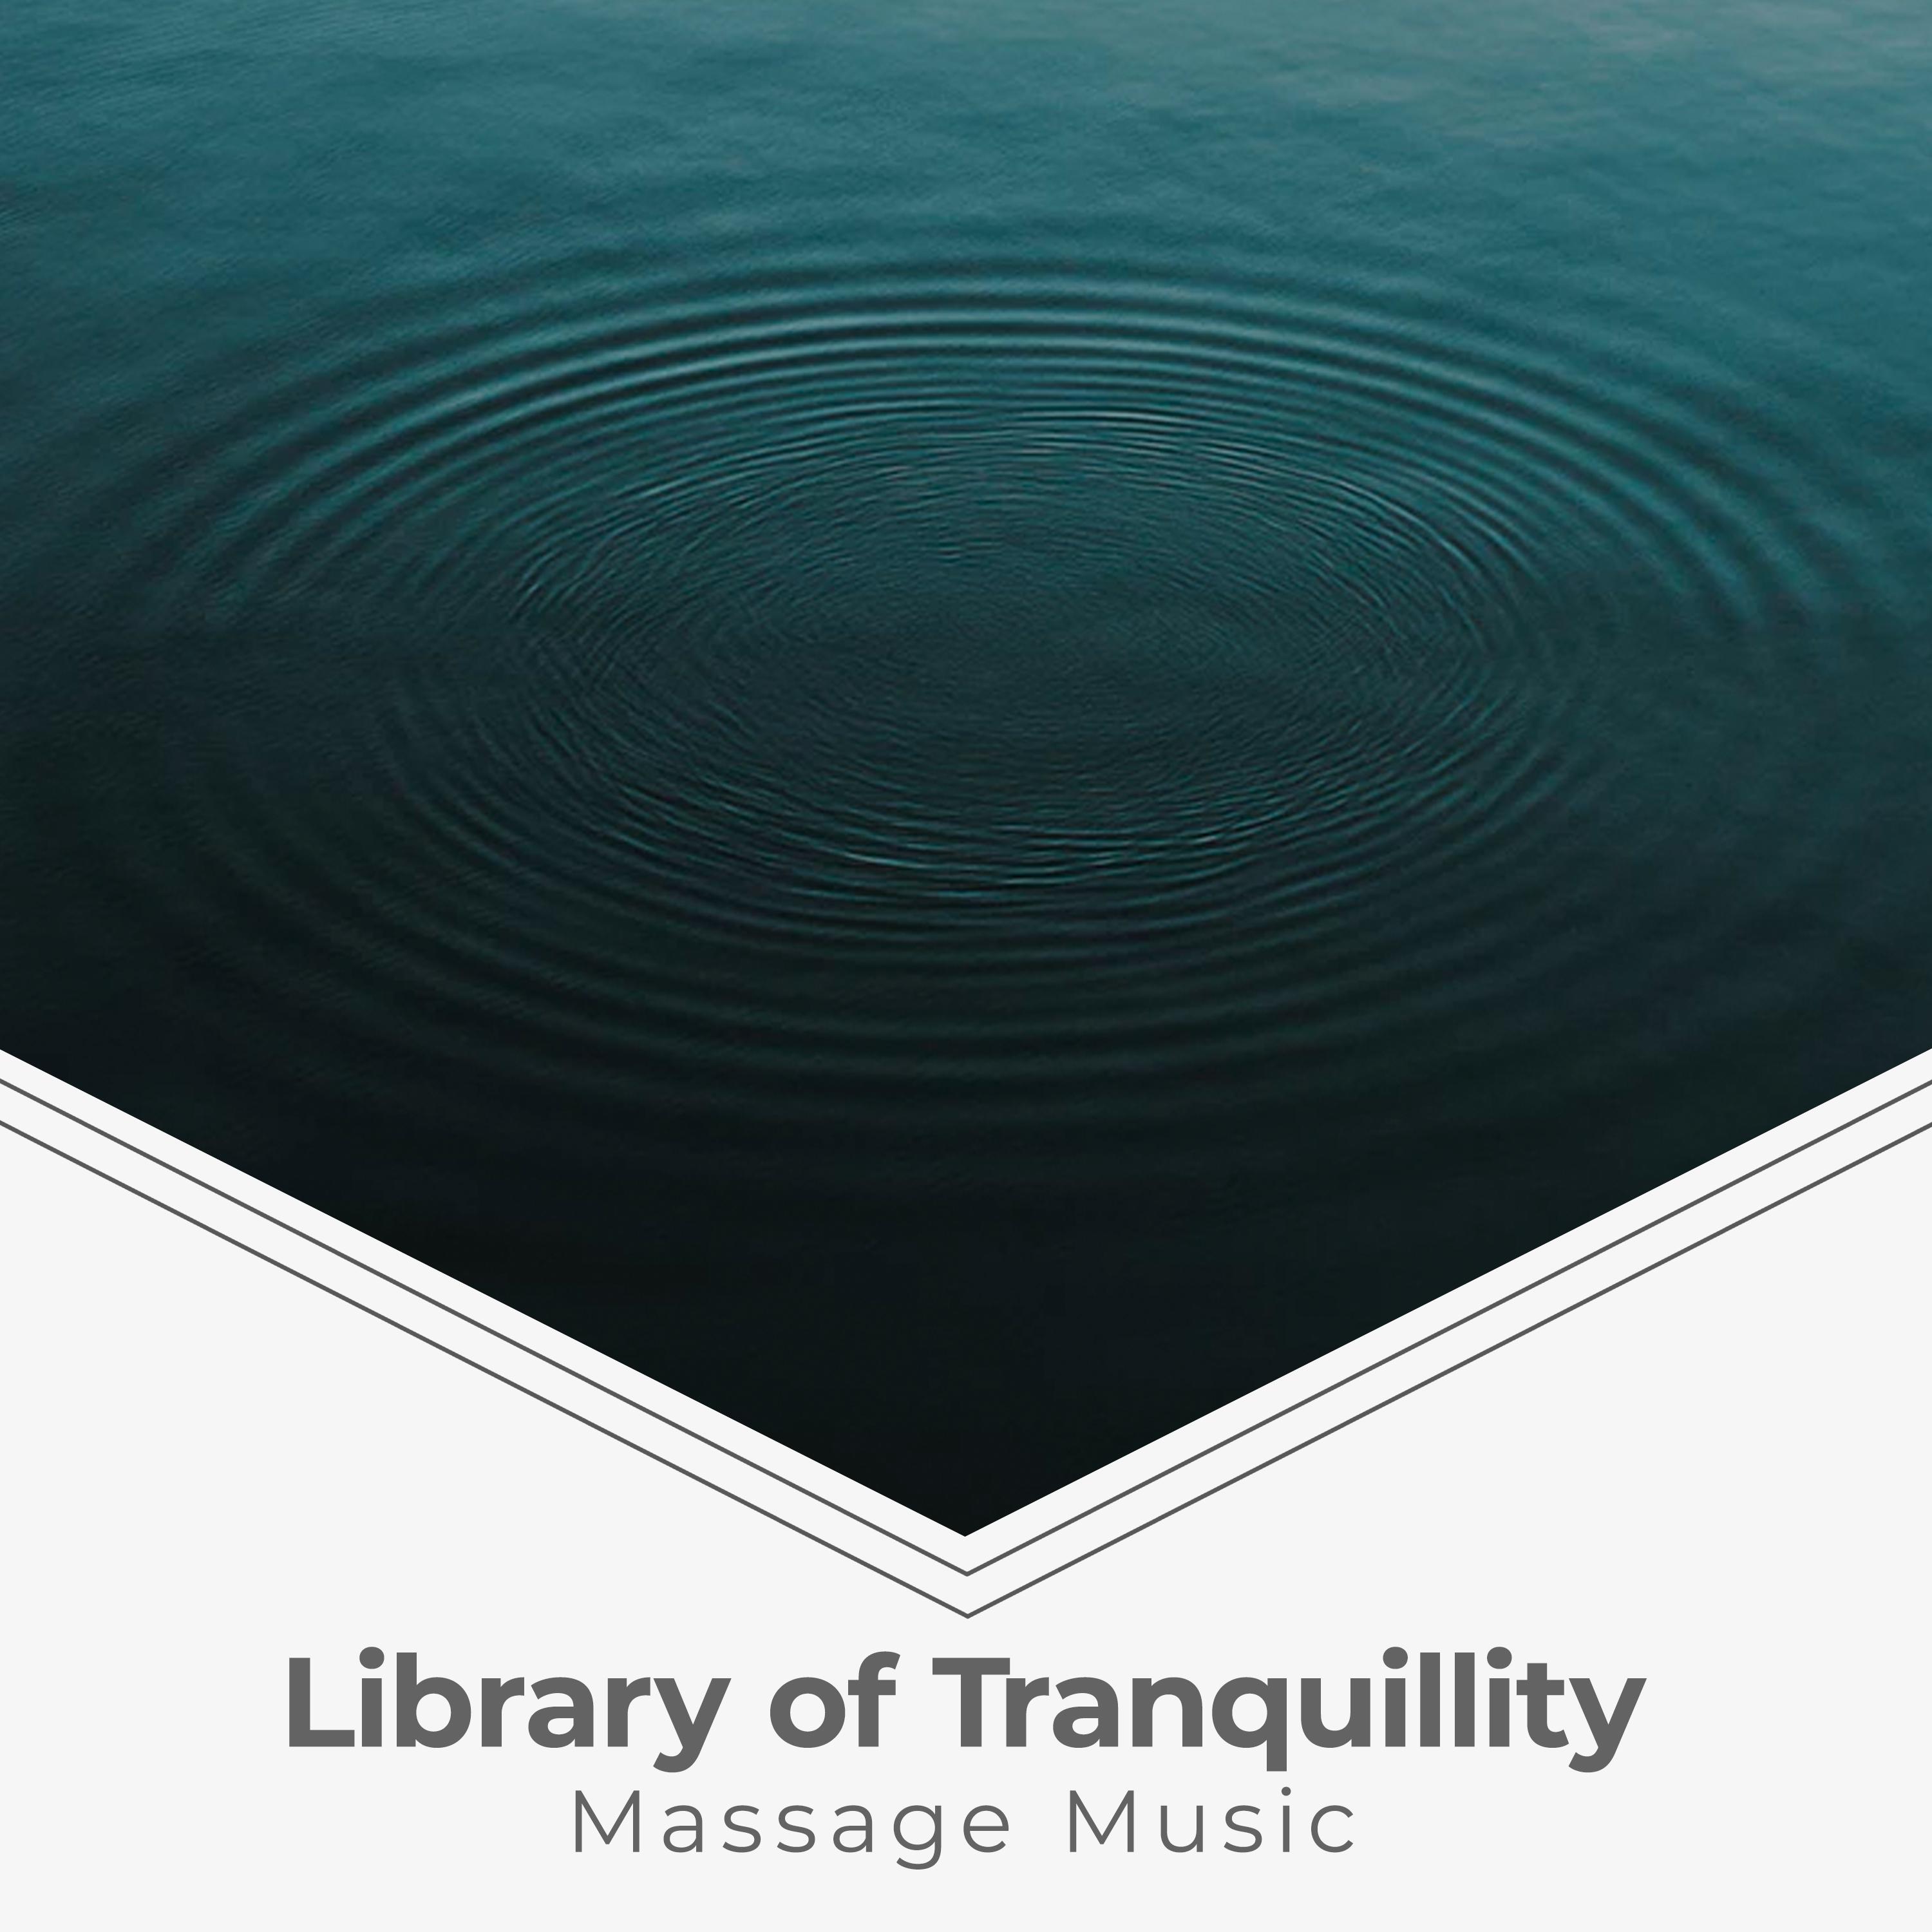 Library of Tranquillity